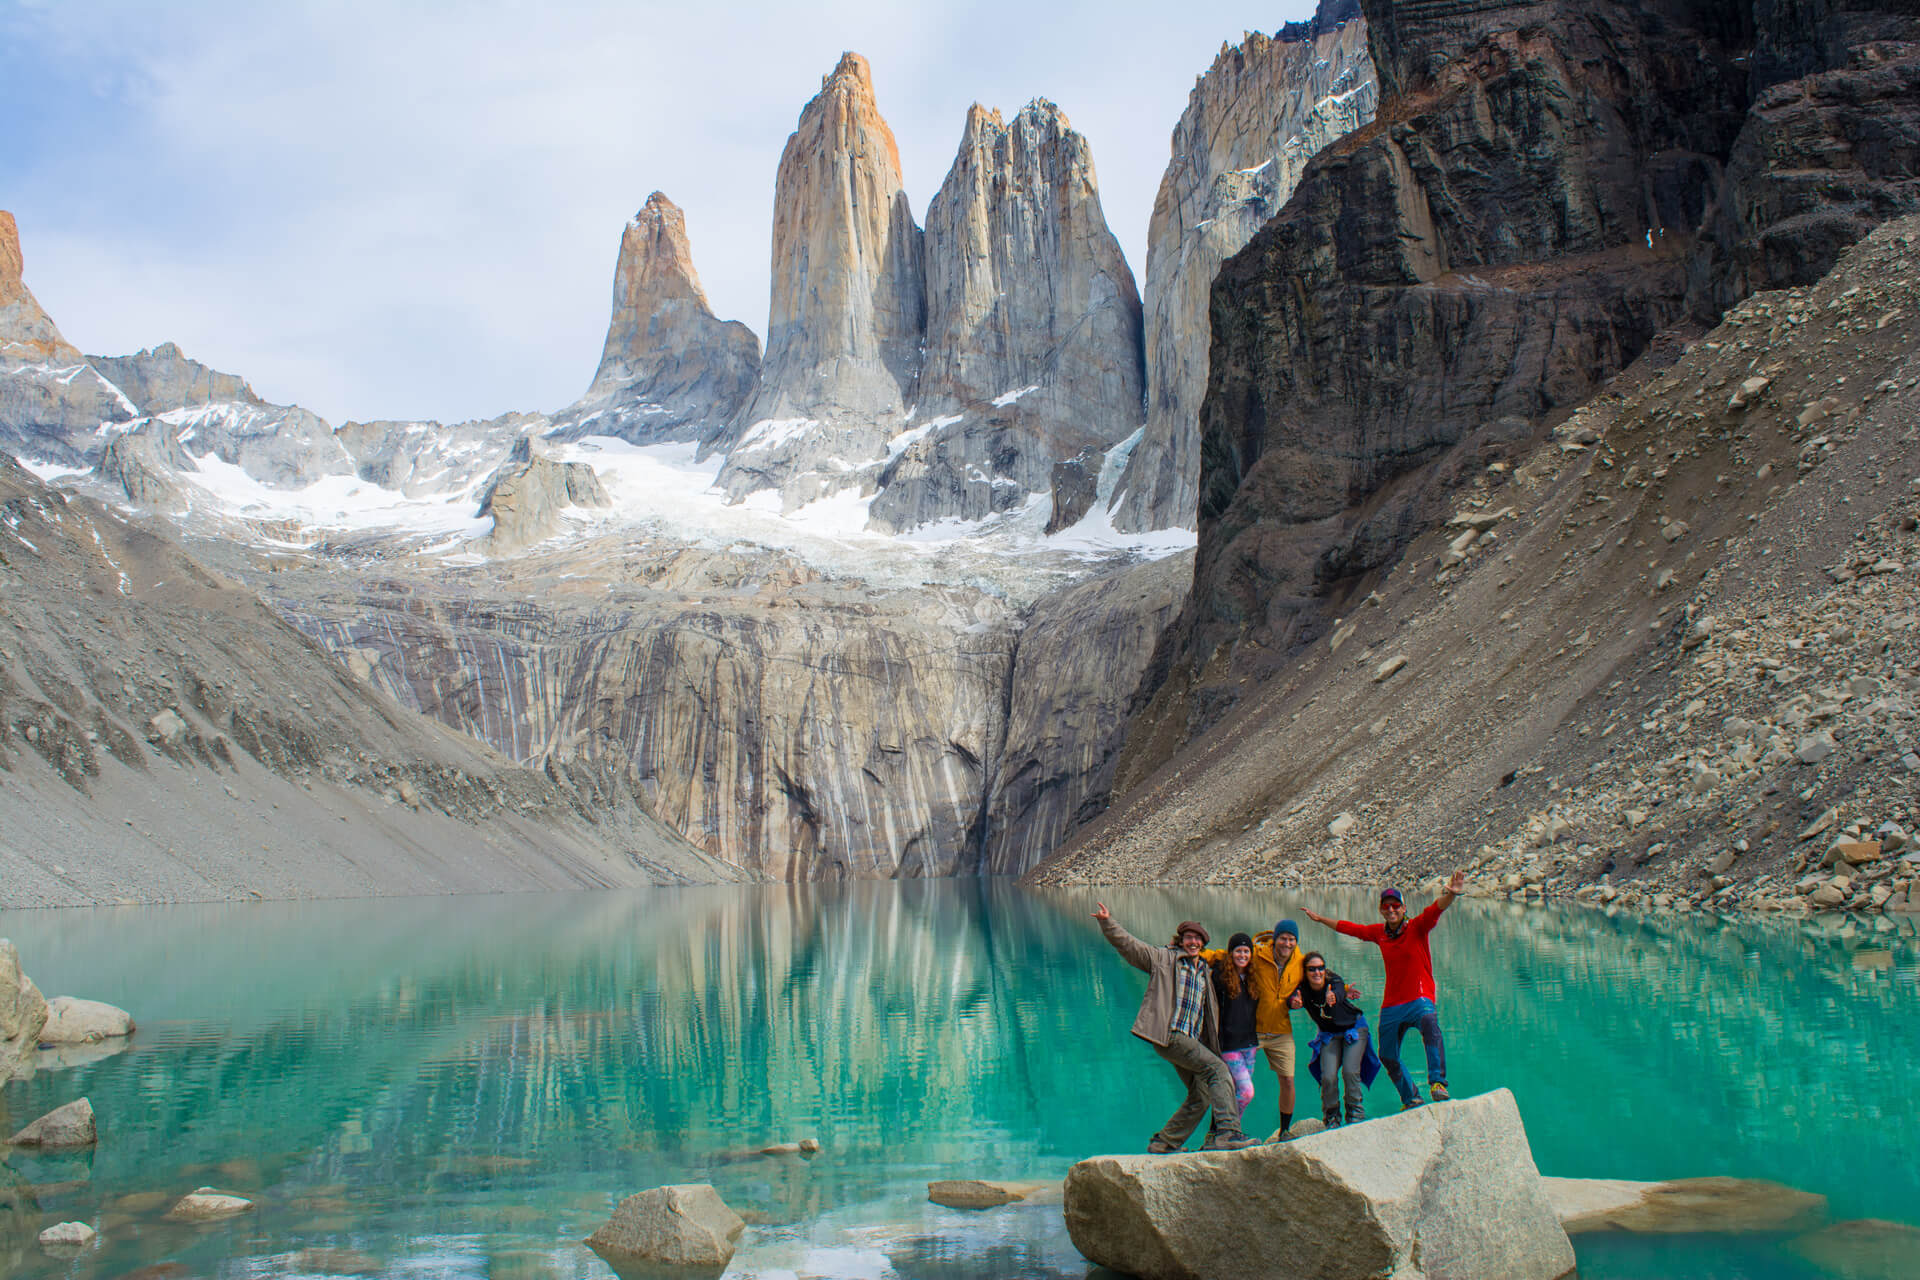 The World’s 15 Greatest Hikes: A Bucket List for Adventurers